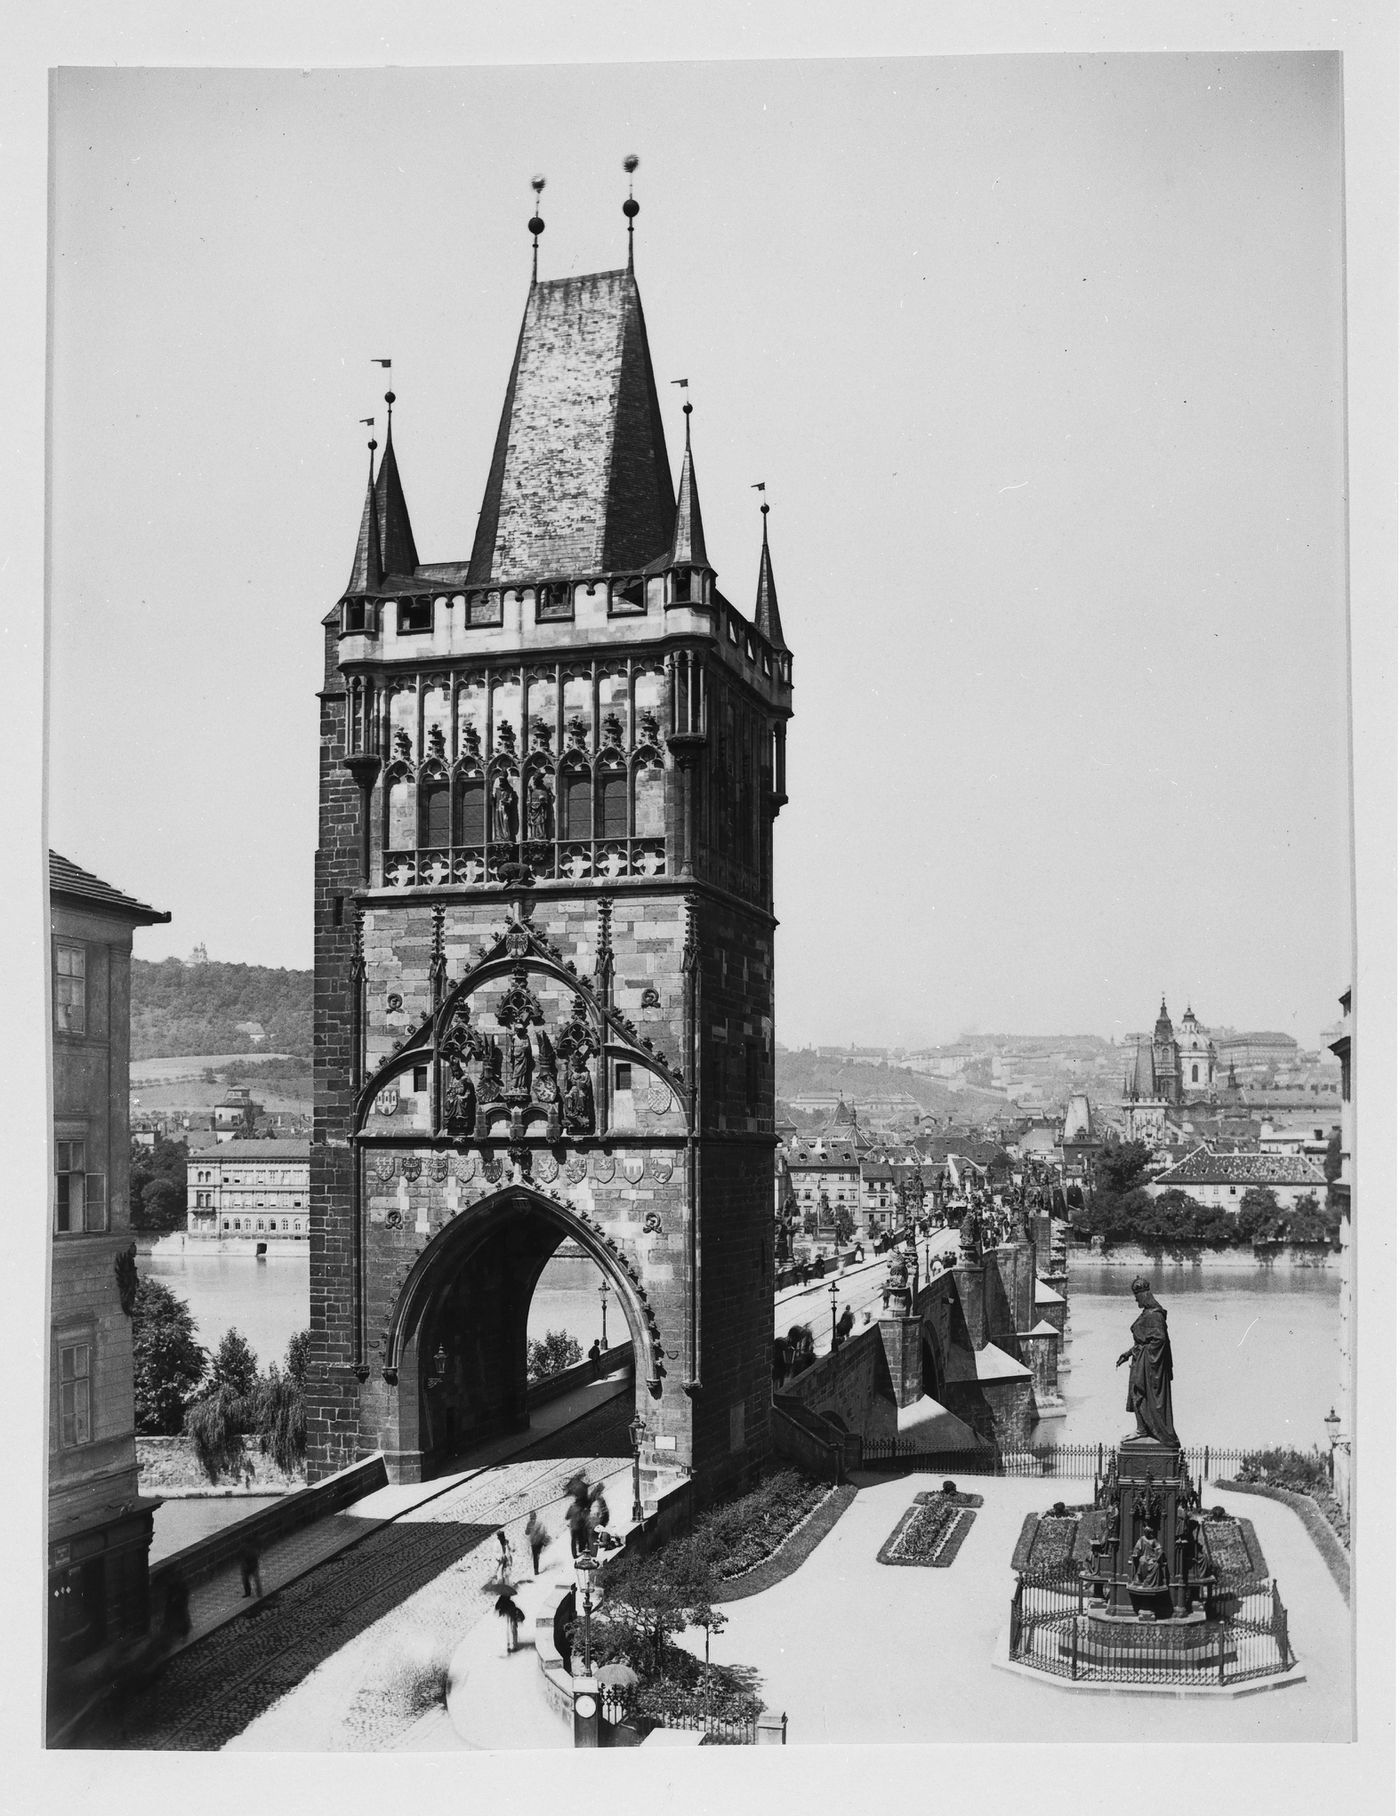 View of tower and bridge, looking across the river, with statue in foreground, Prague, Czeckoslovakia